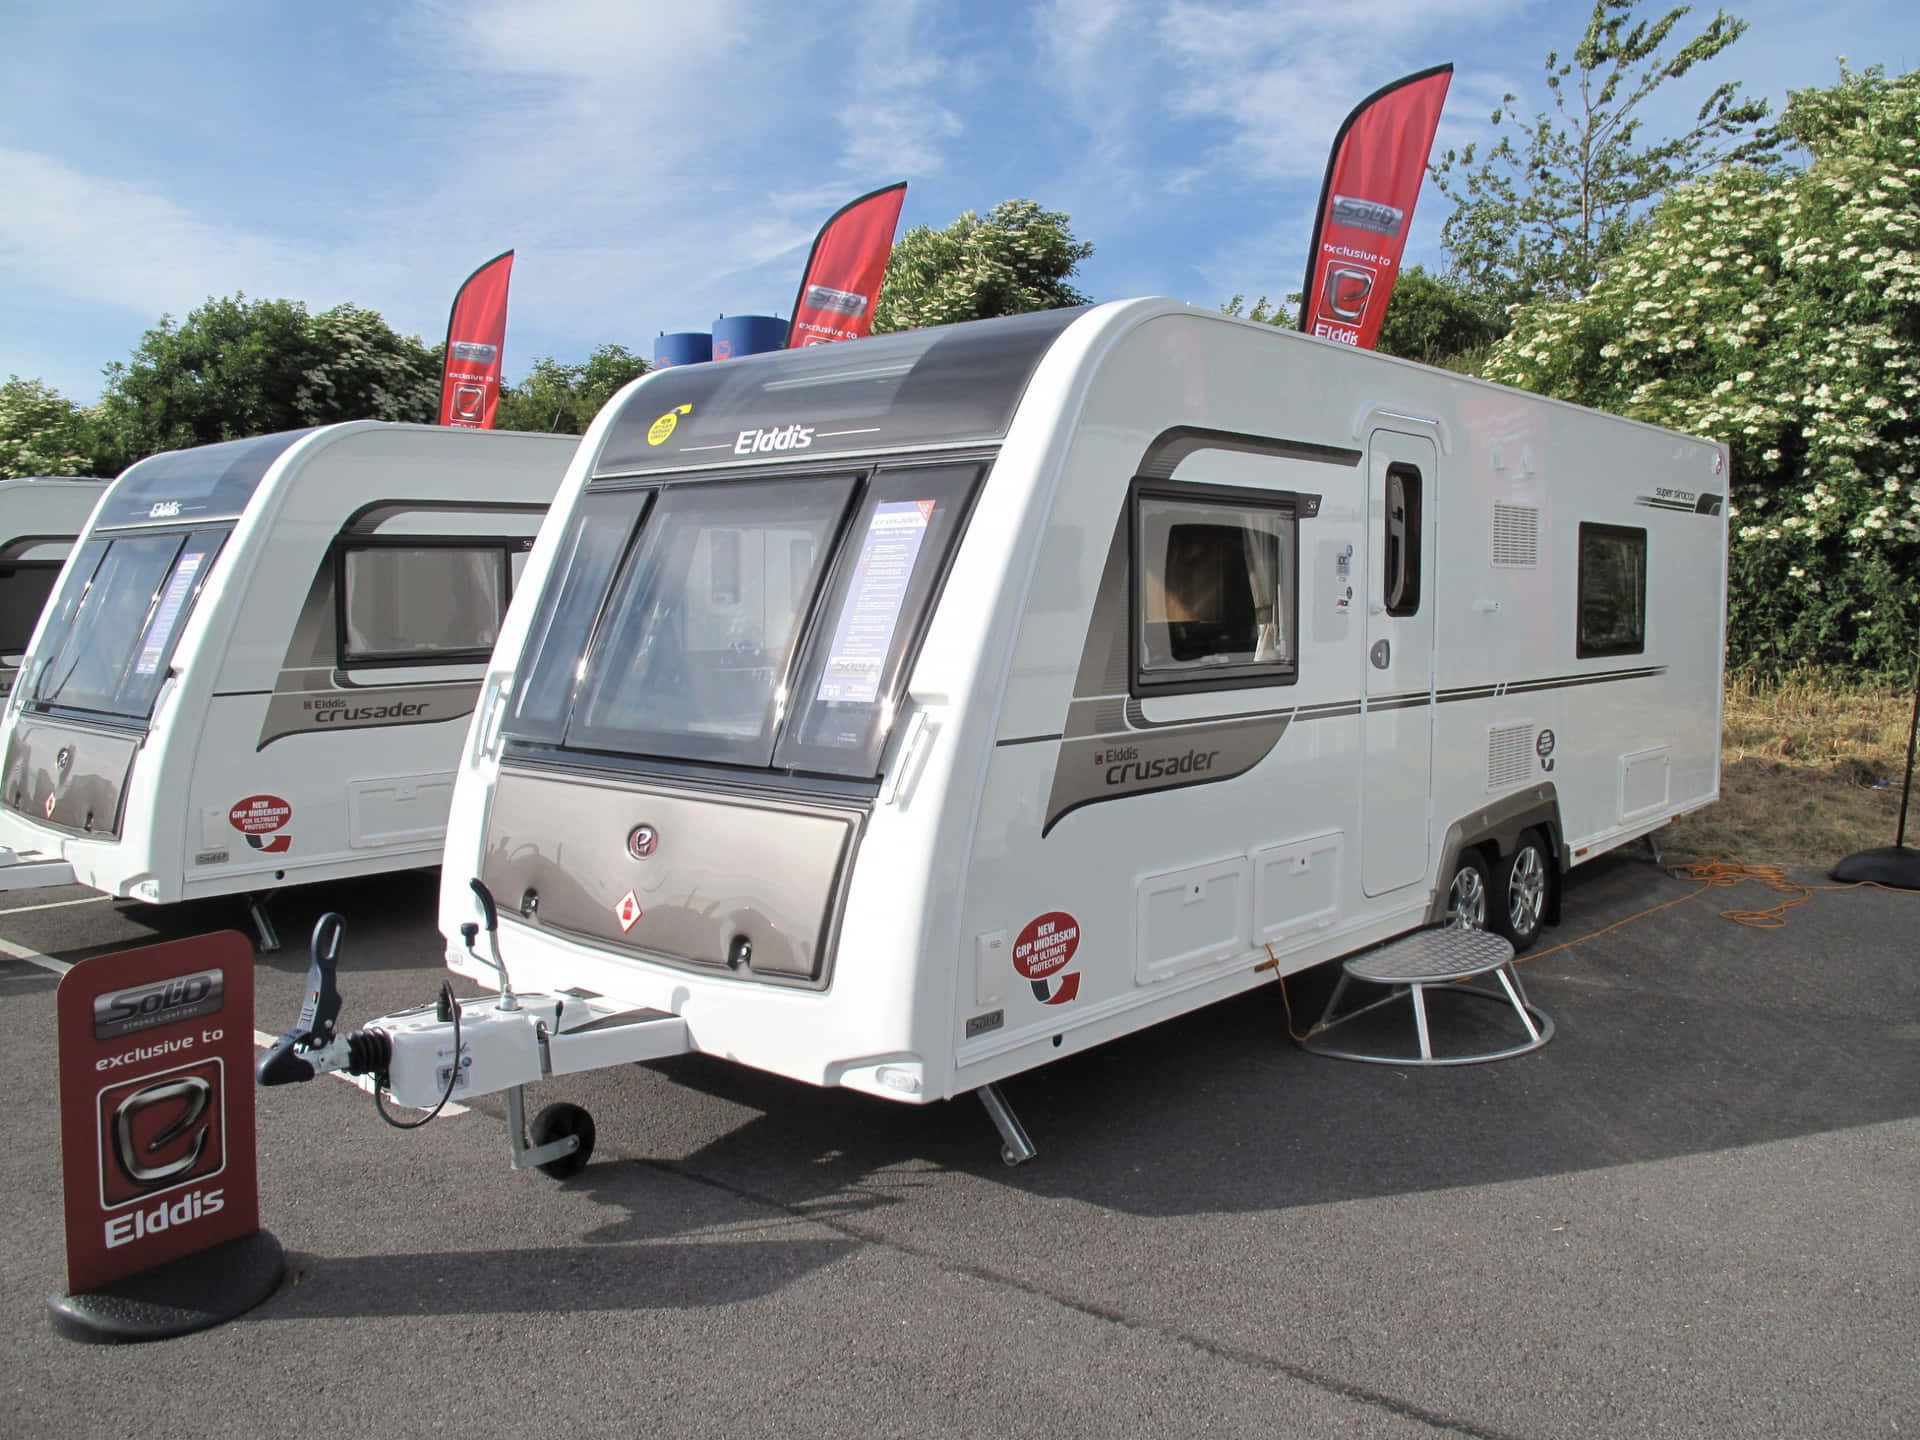 Enjoy the Outdoors in Comfort and Style with a Caravan